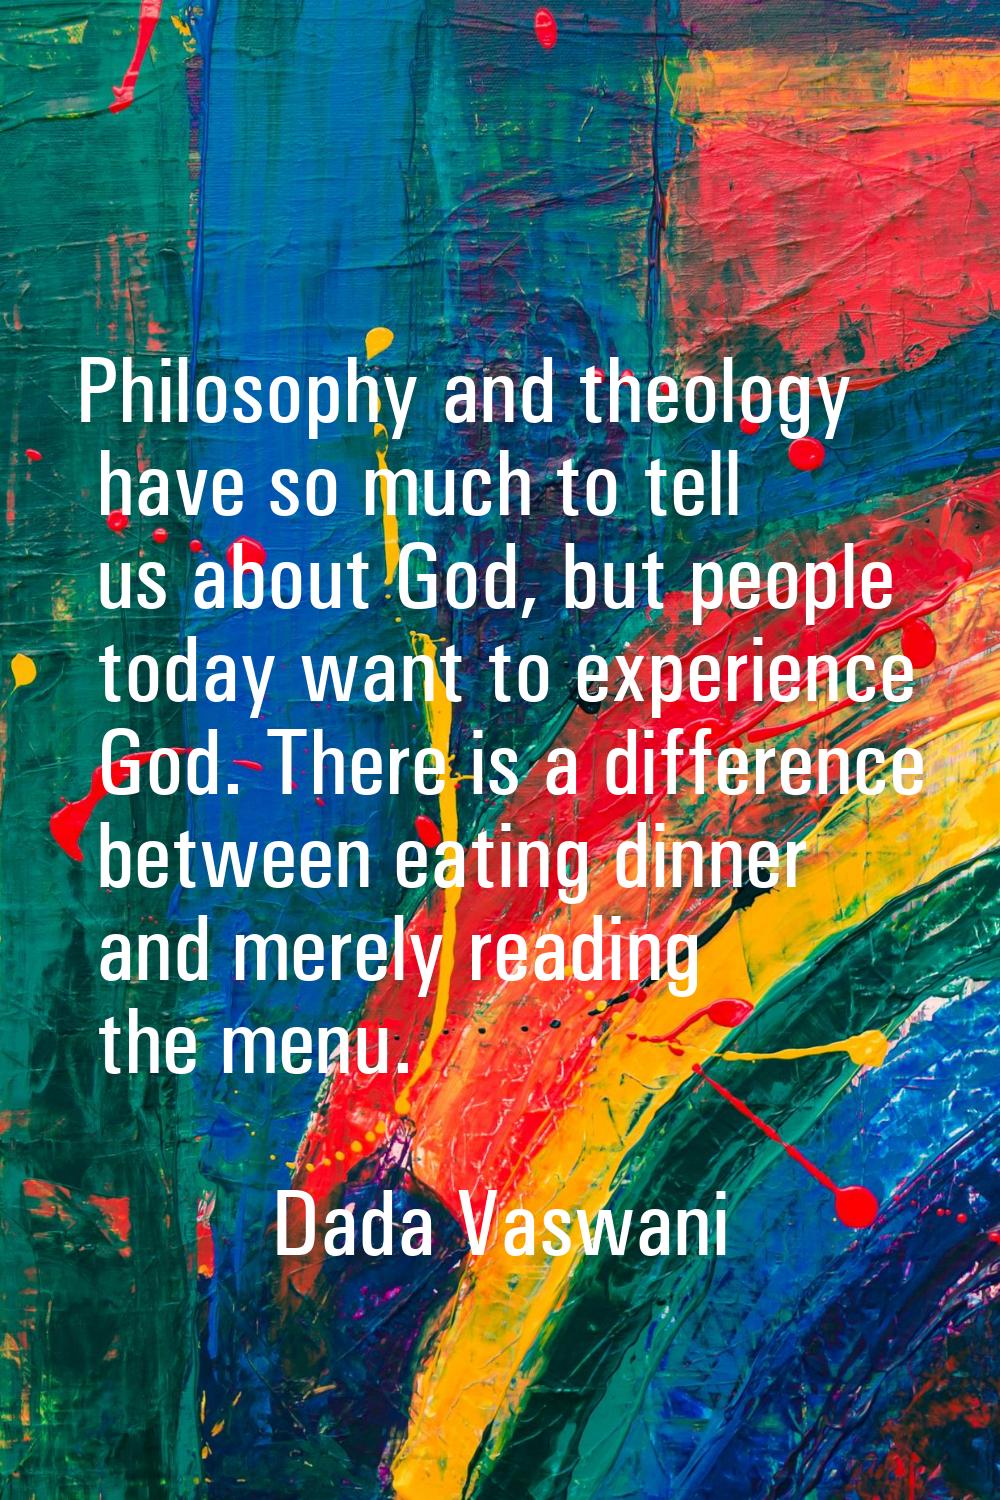 Philosophy and theology have so much to tell us about God, but people today want to experience God.